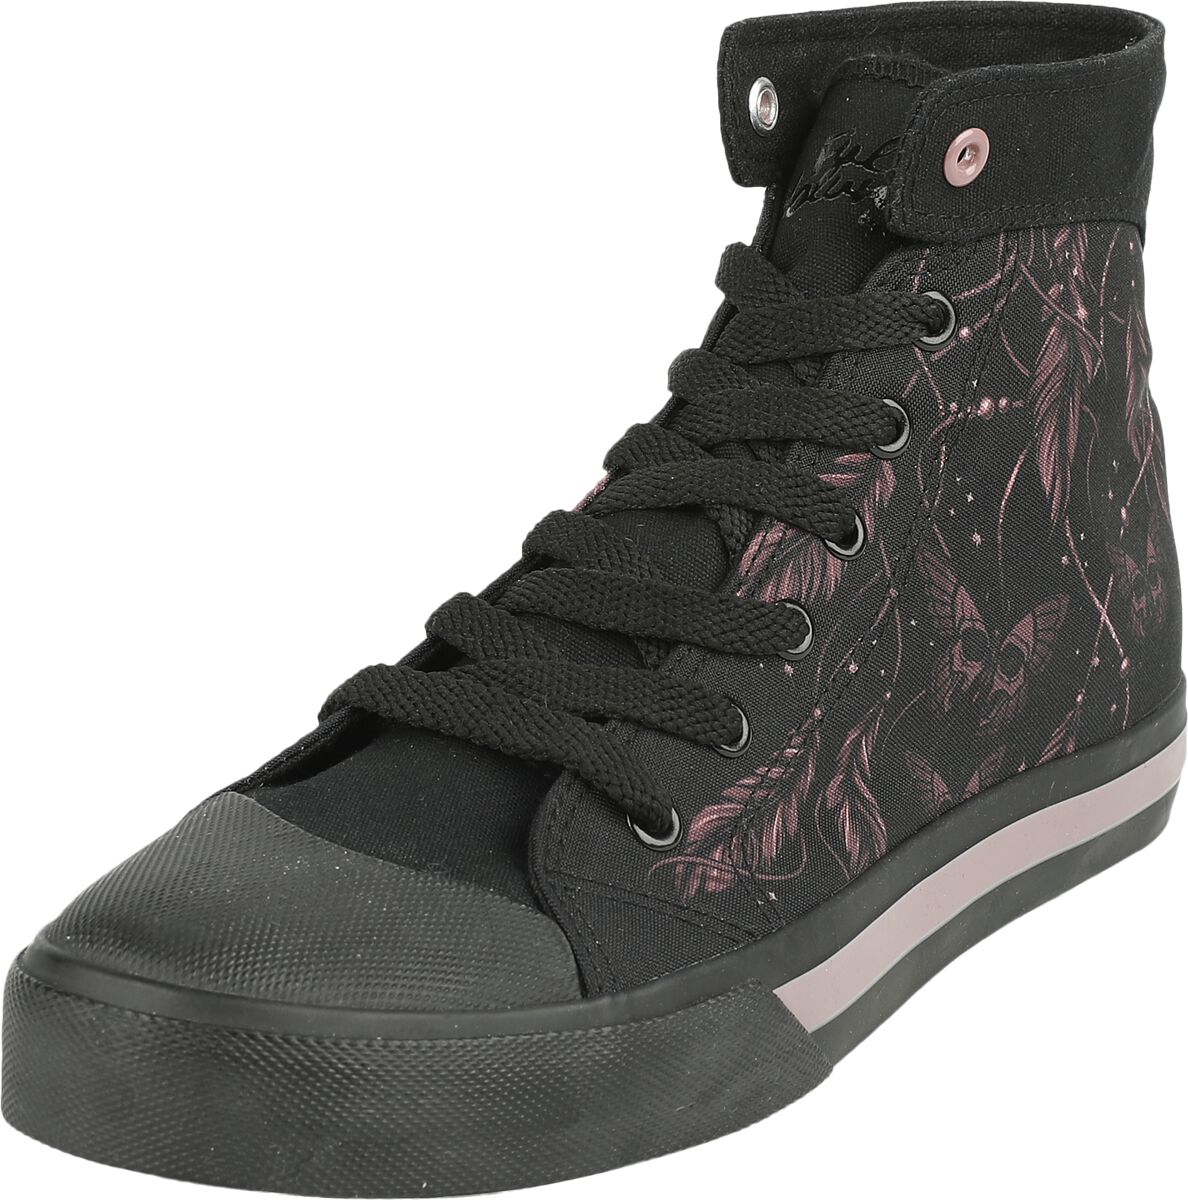 Full Volume by EMP Sneaker with Feathers and Butterflies Sneaker high schwarz in EU40